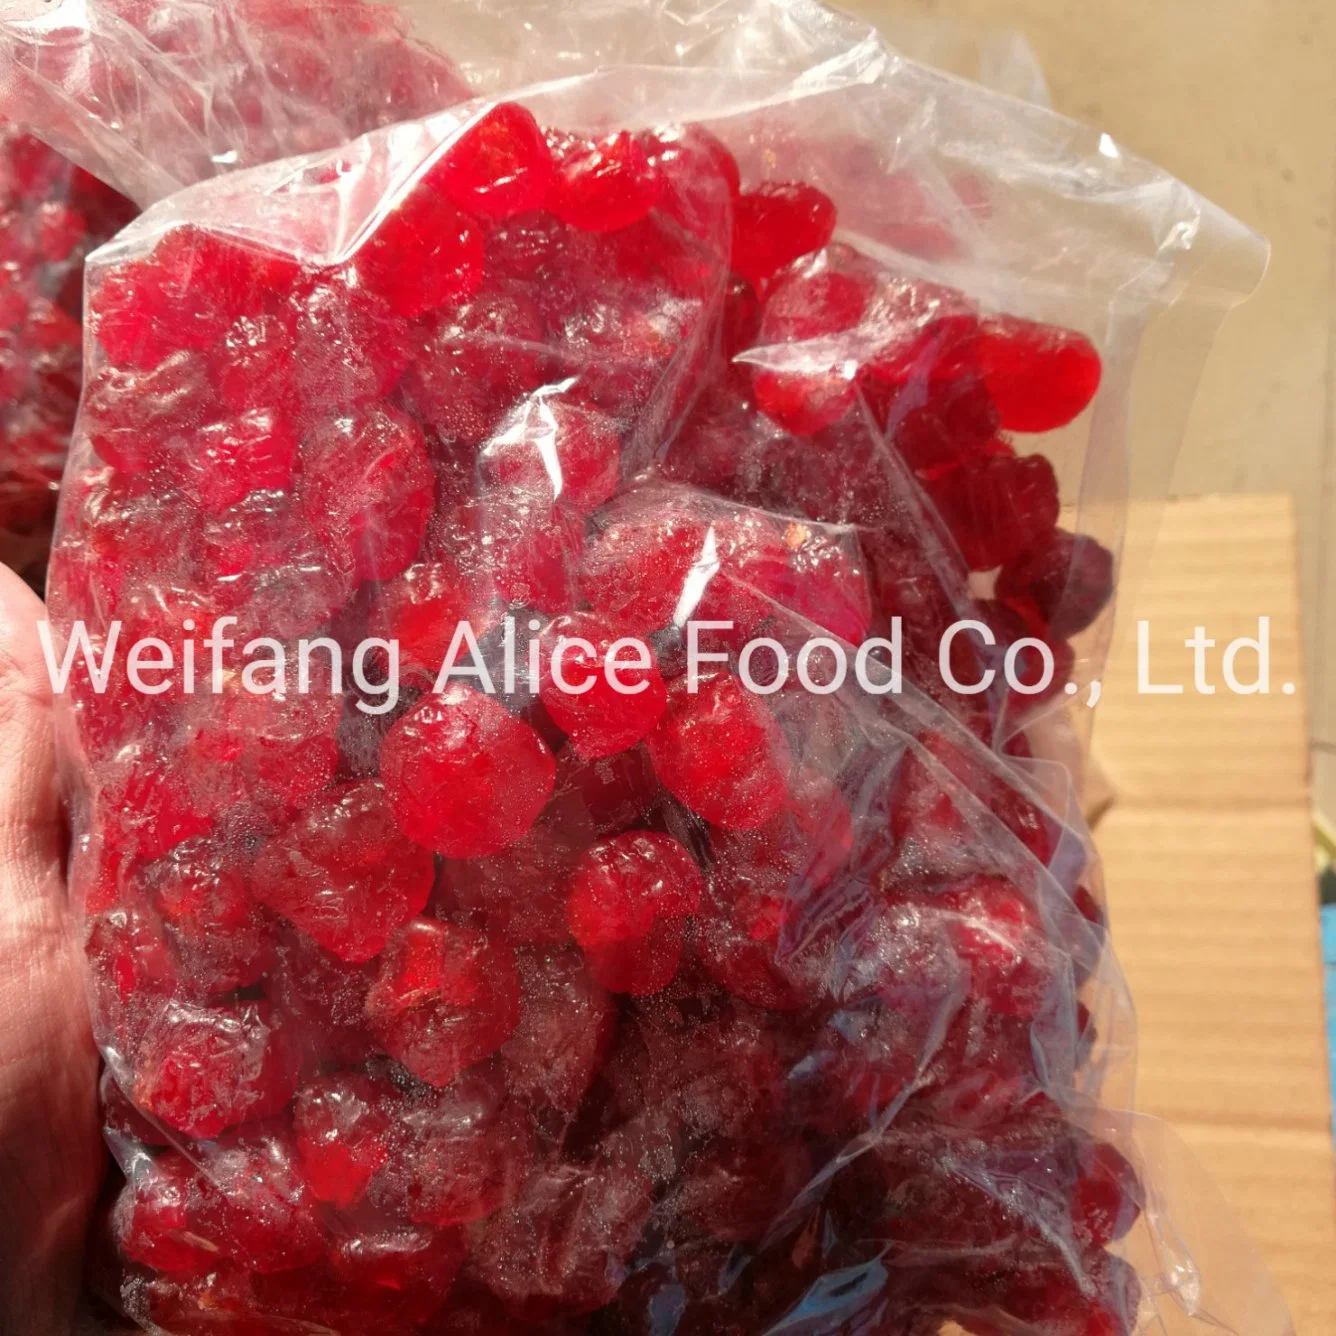 Wholesale/Supplier China Sweet Cherries Dried Cherry Fruit